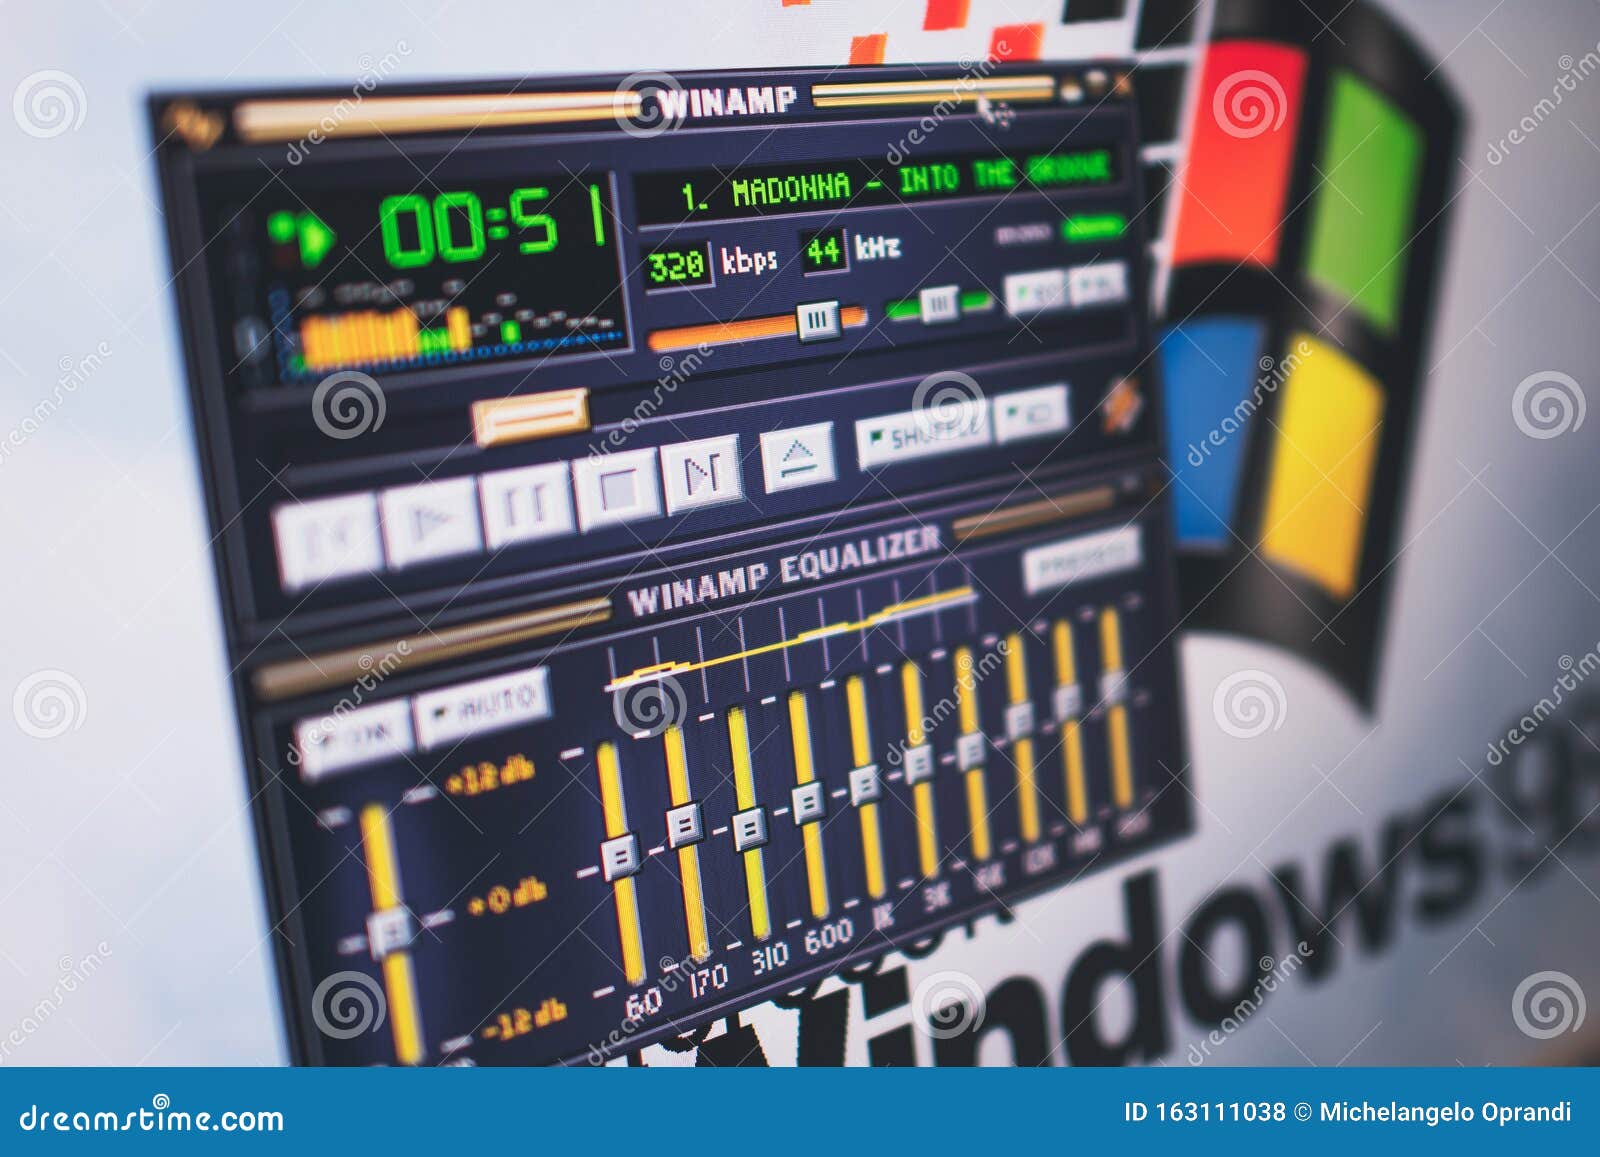 The Historic Mp3 Player Winamp Plays Madonna in To Tge Groove Song on Windows 98 Stock Photo - Image of mythical, computer: 163111038